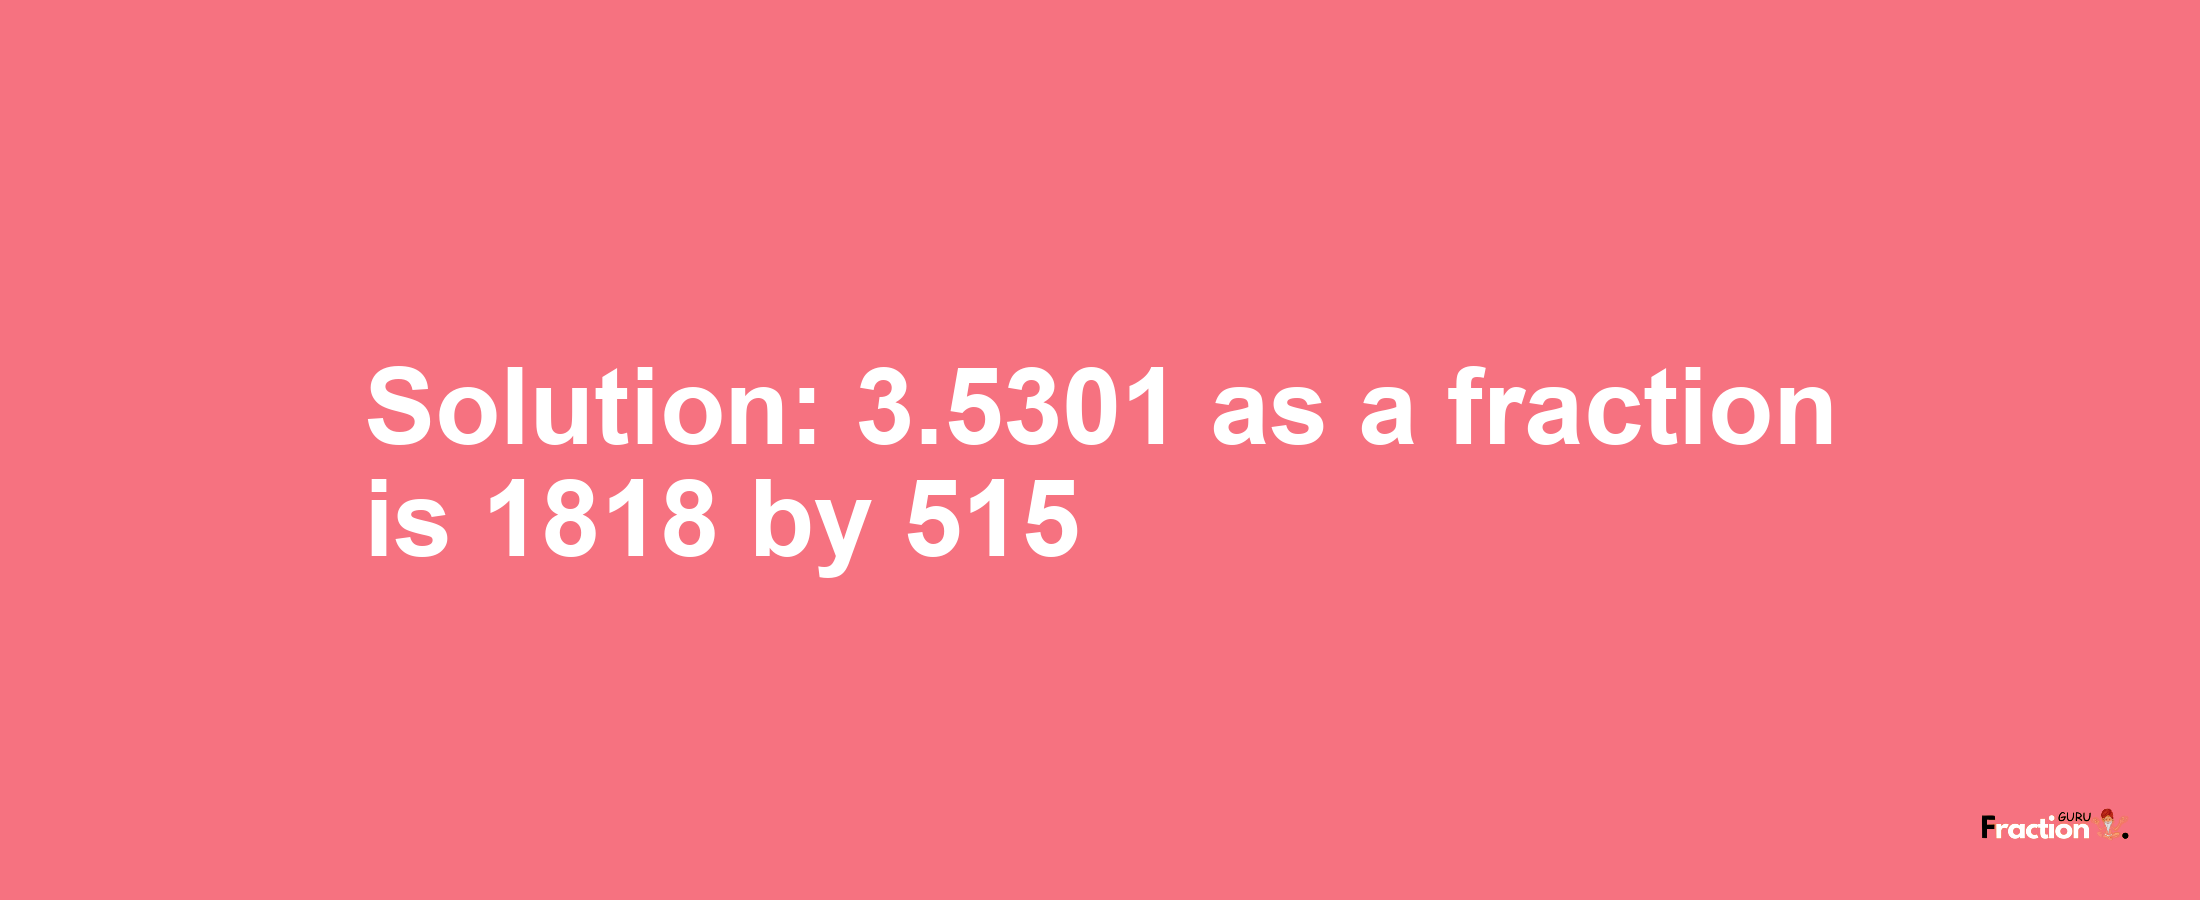 Solution:3.5301 as a fraction is 1818/515